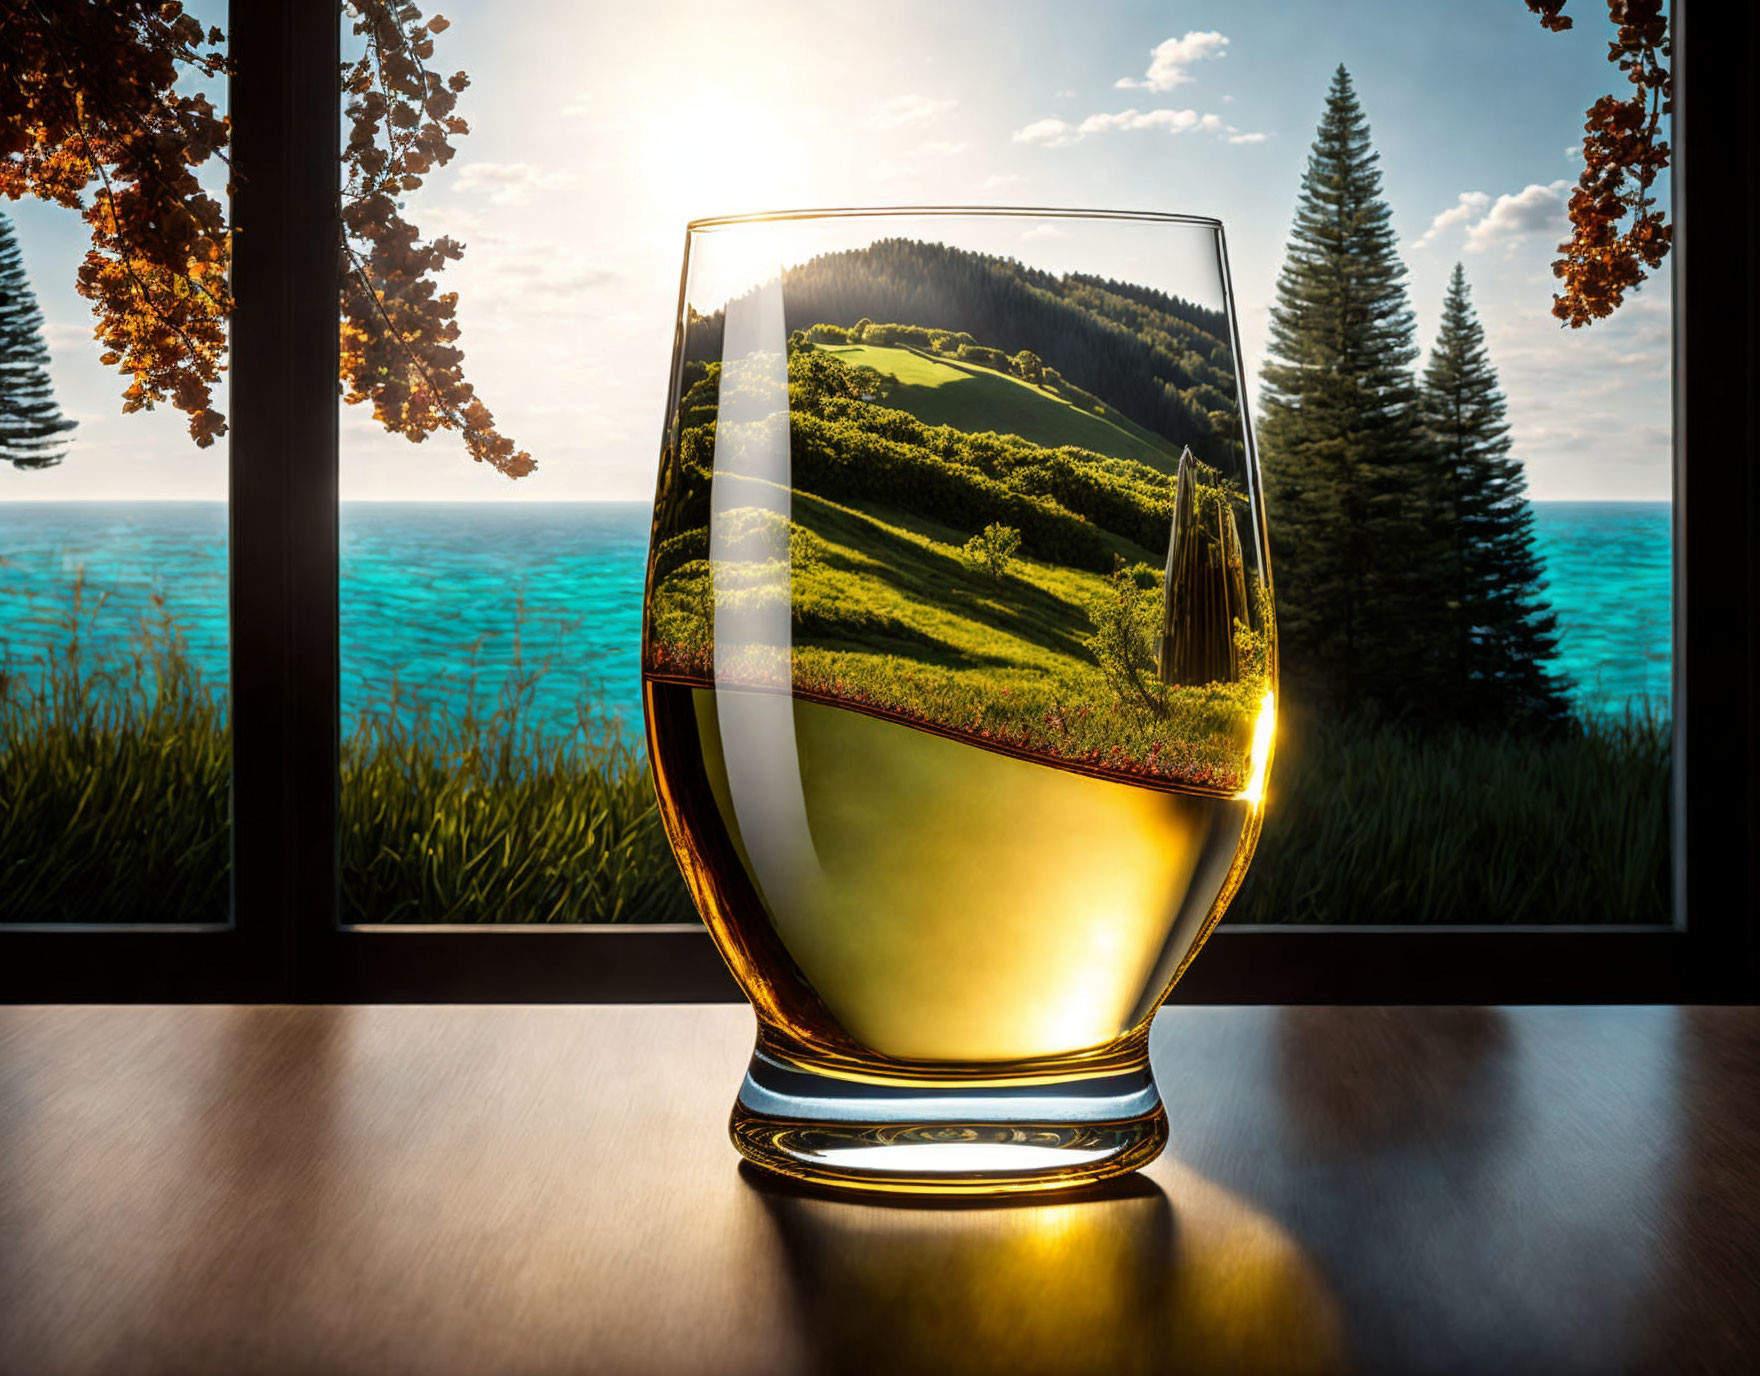 Whiskey glass reflecting countryside and ocean on wooden table